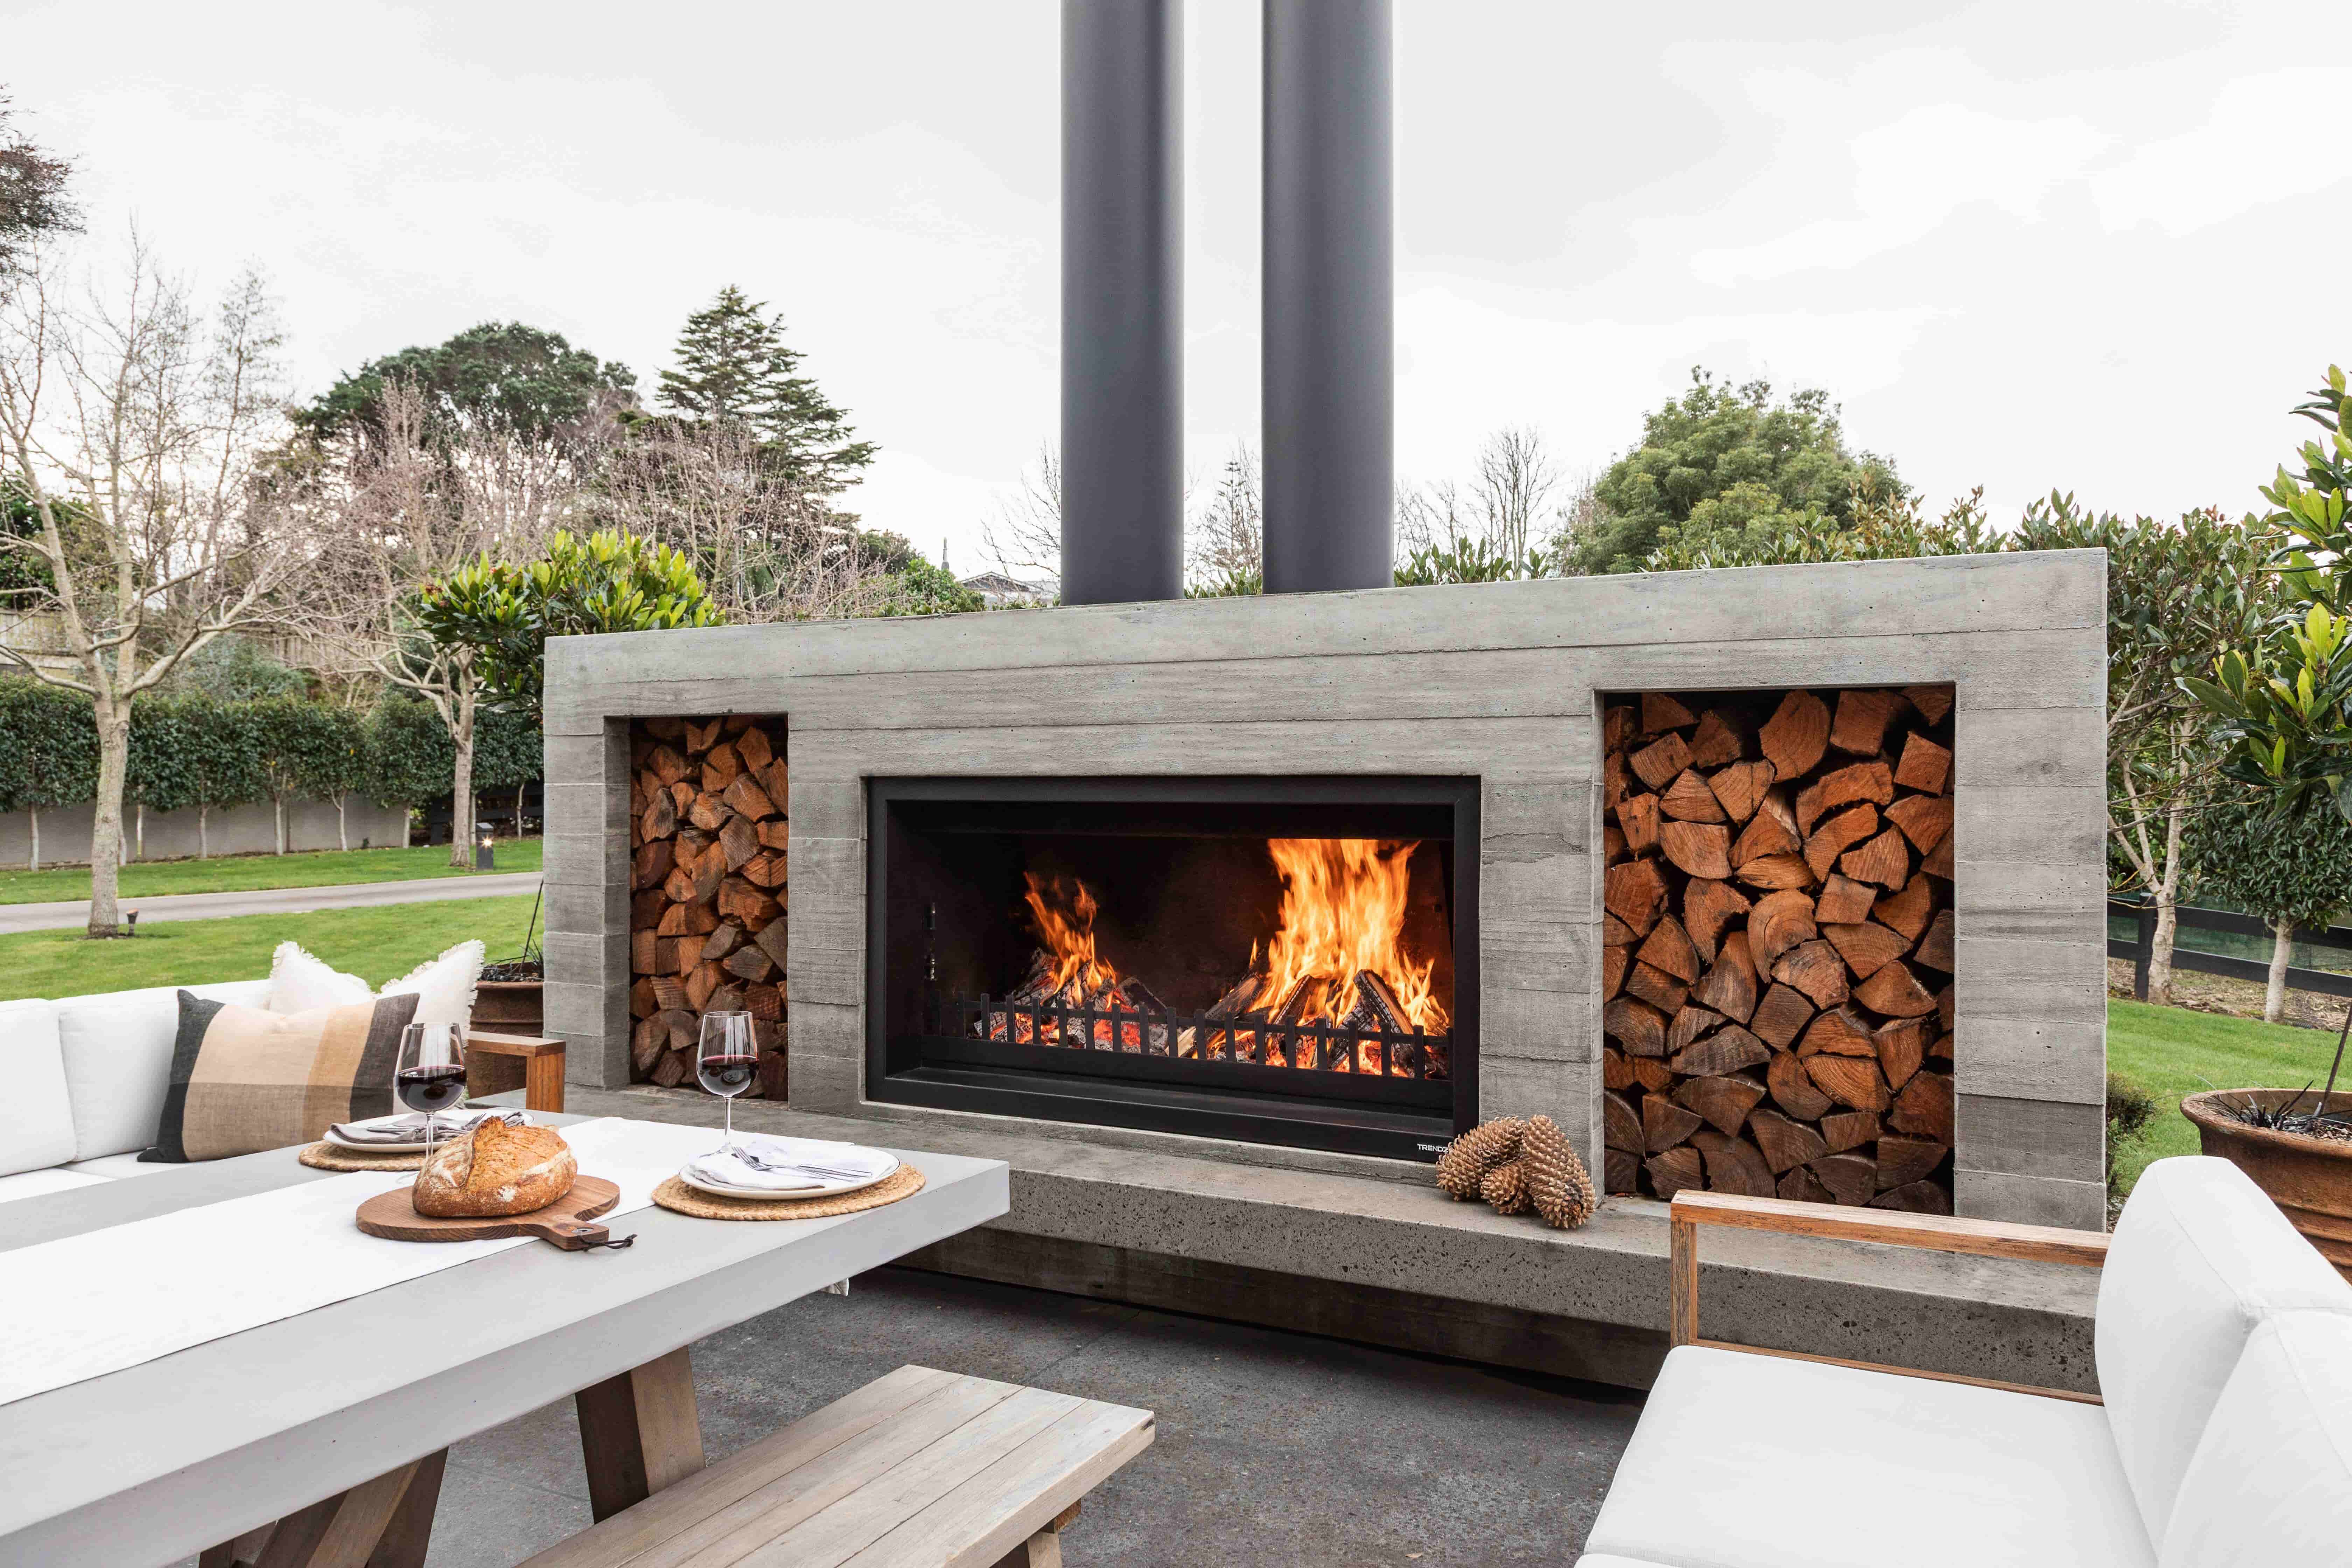 Fireplace | Bare wood-grain concrete finish | Wood boxes | Hearth